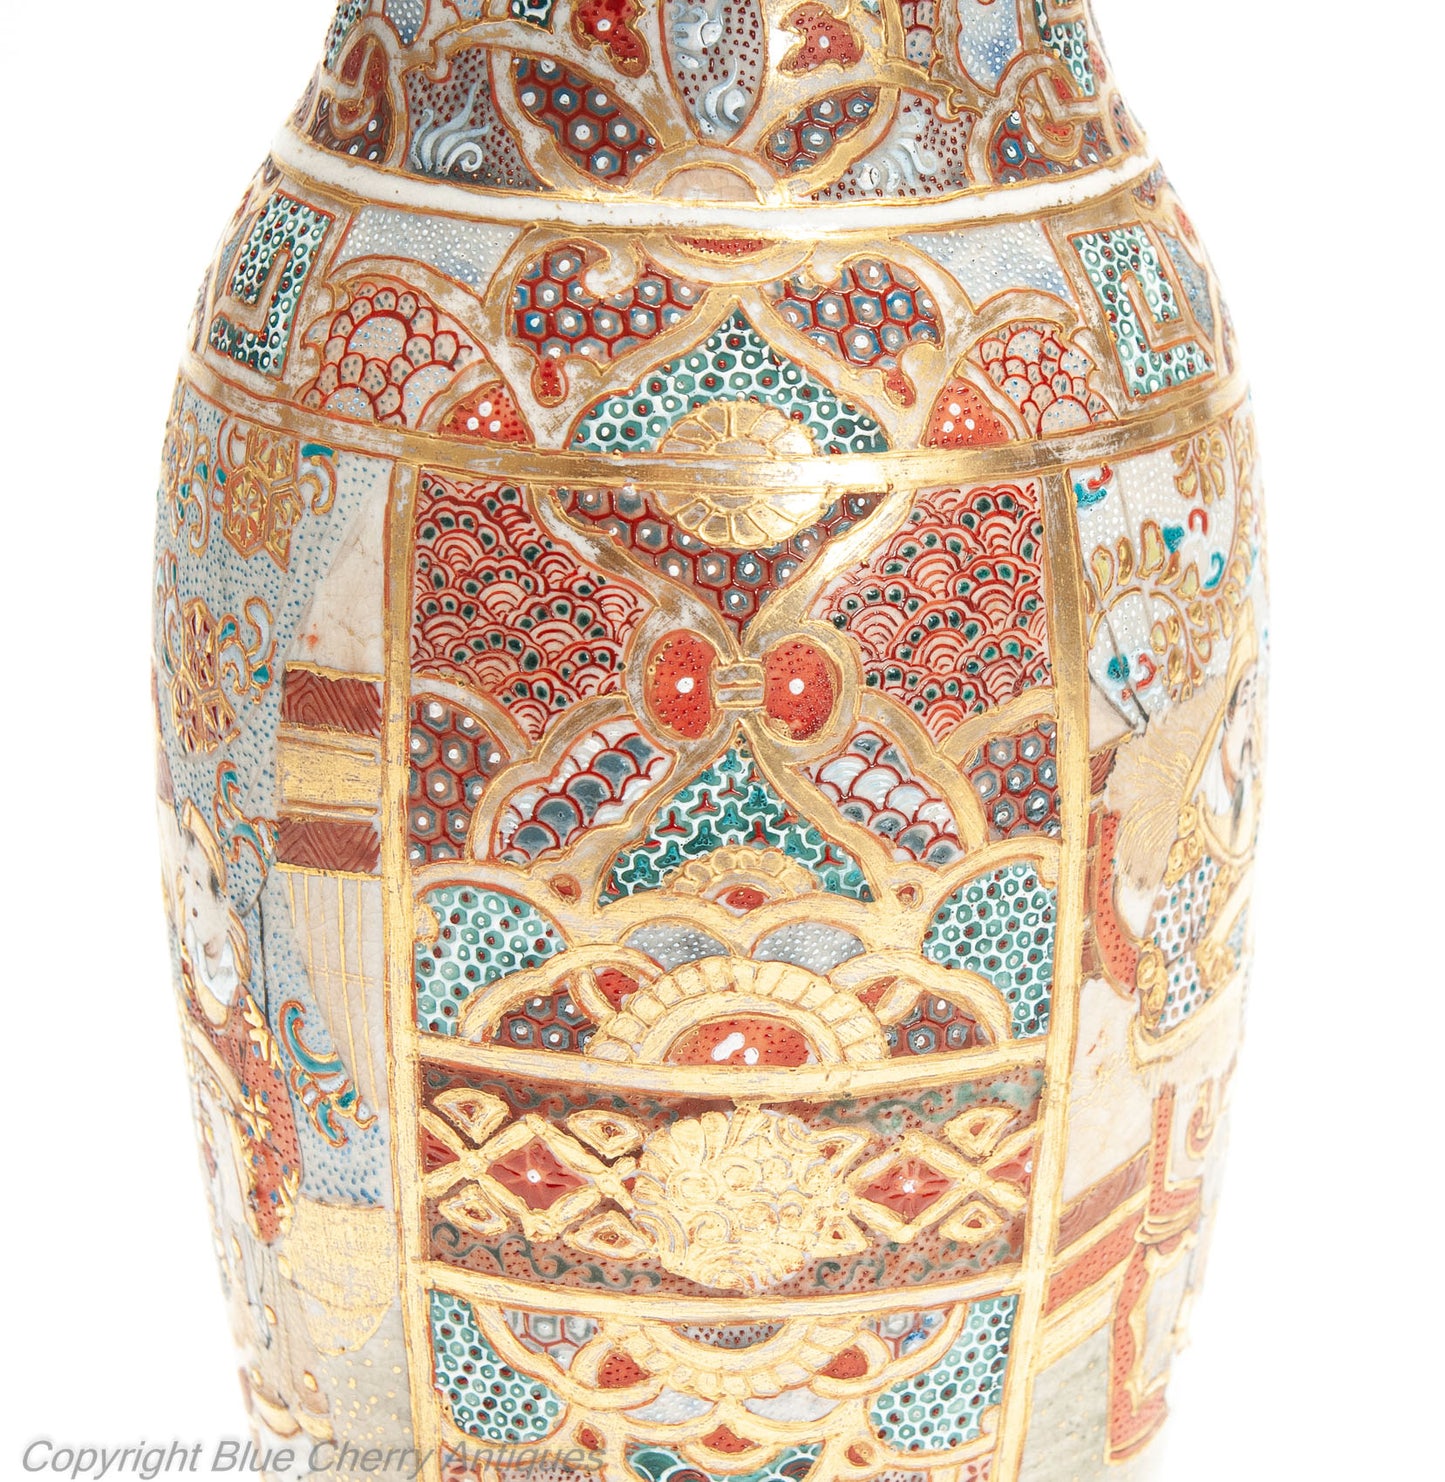 Antique Japanese Satsuma Ware Pottery Vase with Intricate Patterns & Figures (Code 1997)